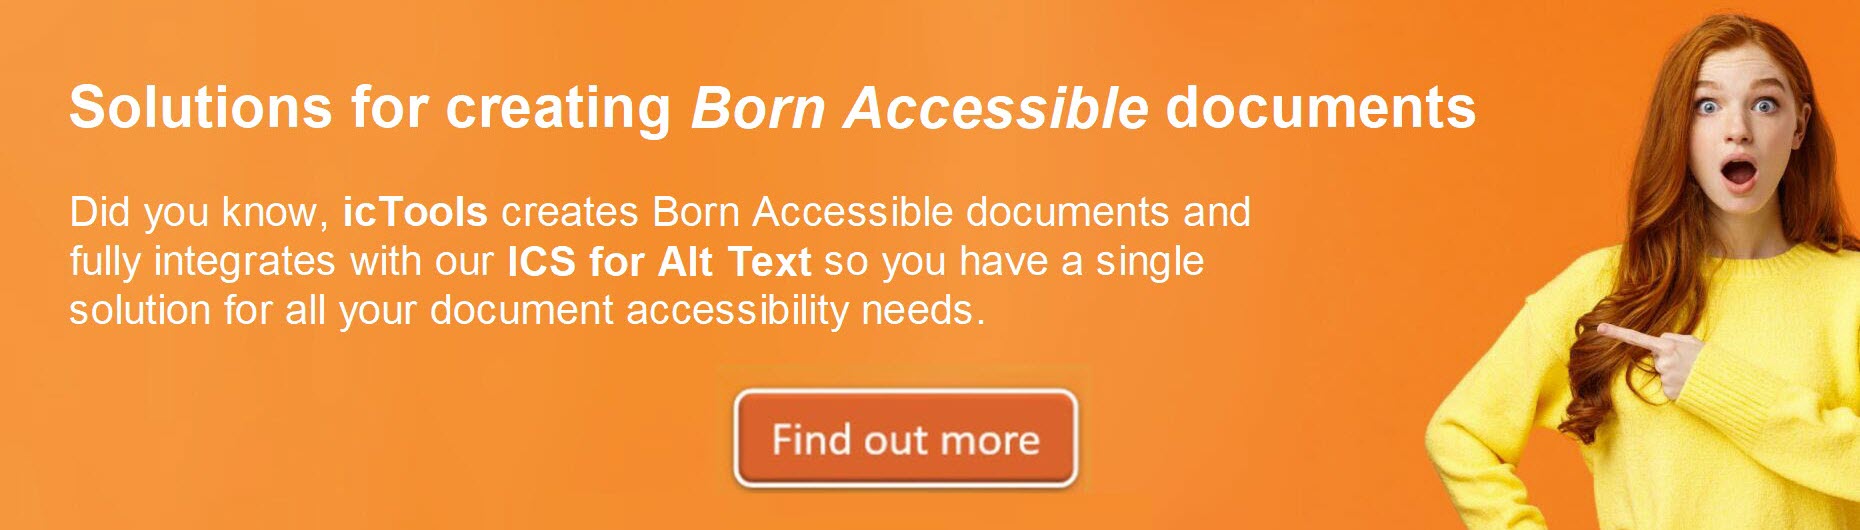 Solutions for creating Born Accessible documents